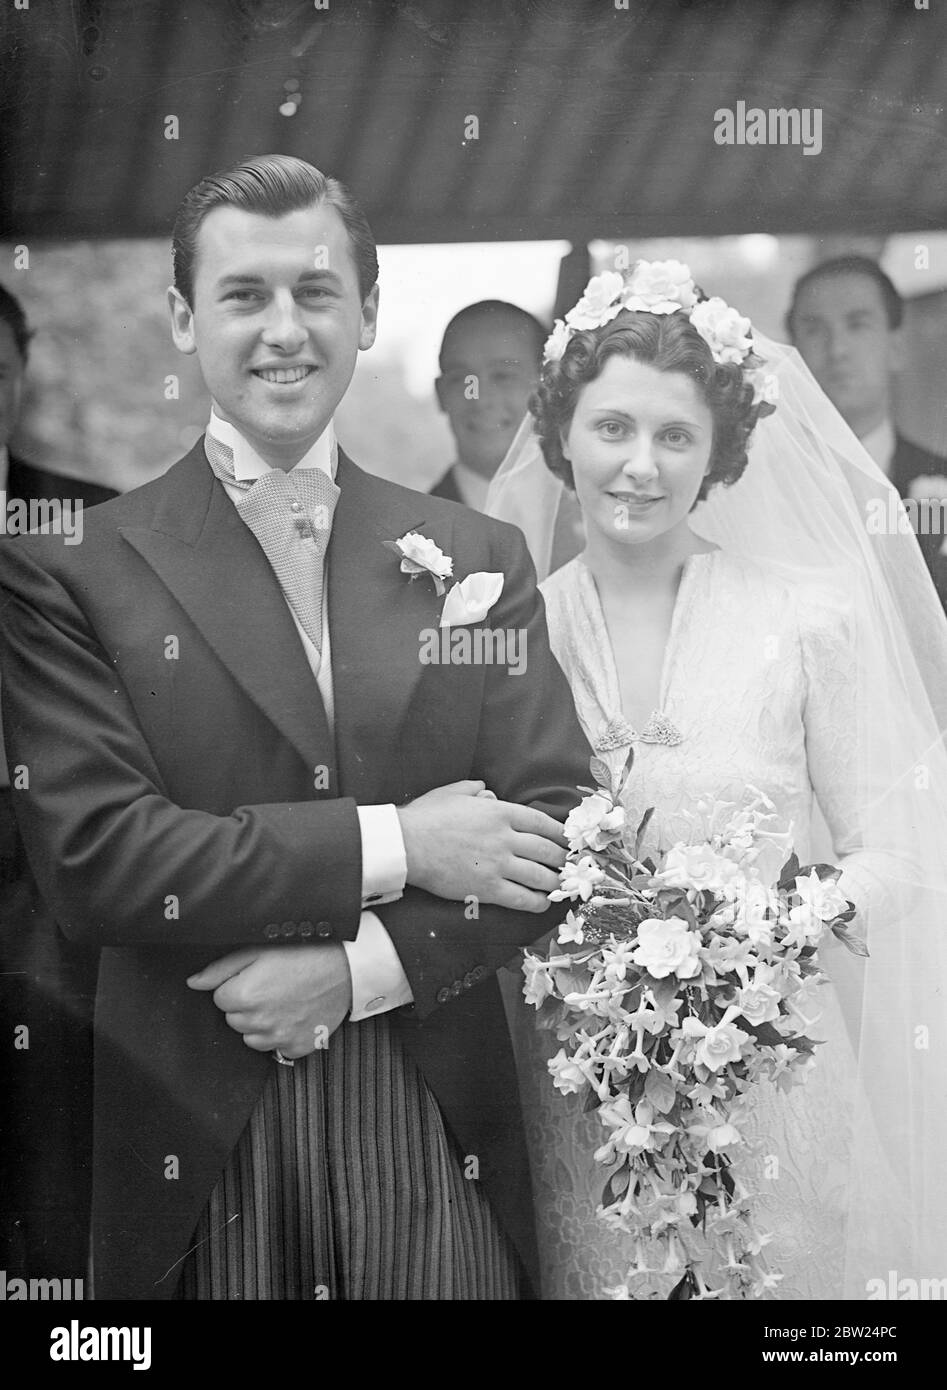 Mr Stewart Granger, the actor who will be Vivien Leigh's leading man Serina Blandish at the Gate Theatre, and Mrs Elspeth March, a member of Basil Dene's company at St Martins Theatre, were married at St Mary's Church, the Boltons, Kensington,London. The bride is 24 and a daughter of Colonel and Mrs HM Mackenzie. Mr Granger's real name is James Stewart. Photo shows the bride and groom leaving the church. 10 September 1938 Stock Photo